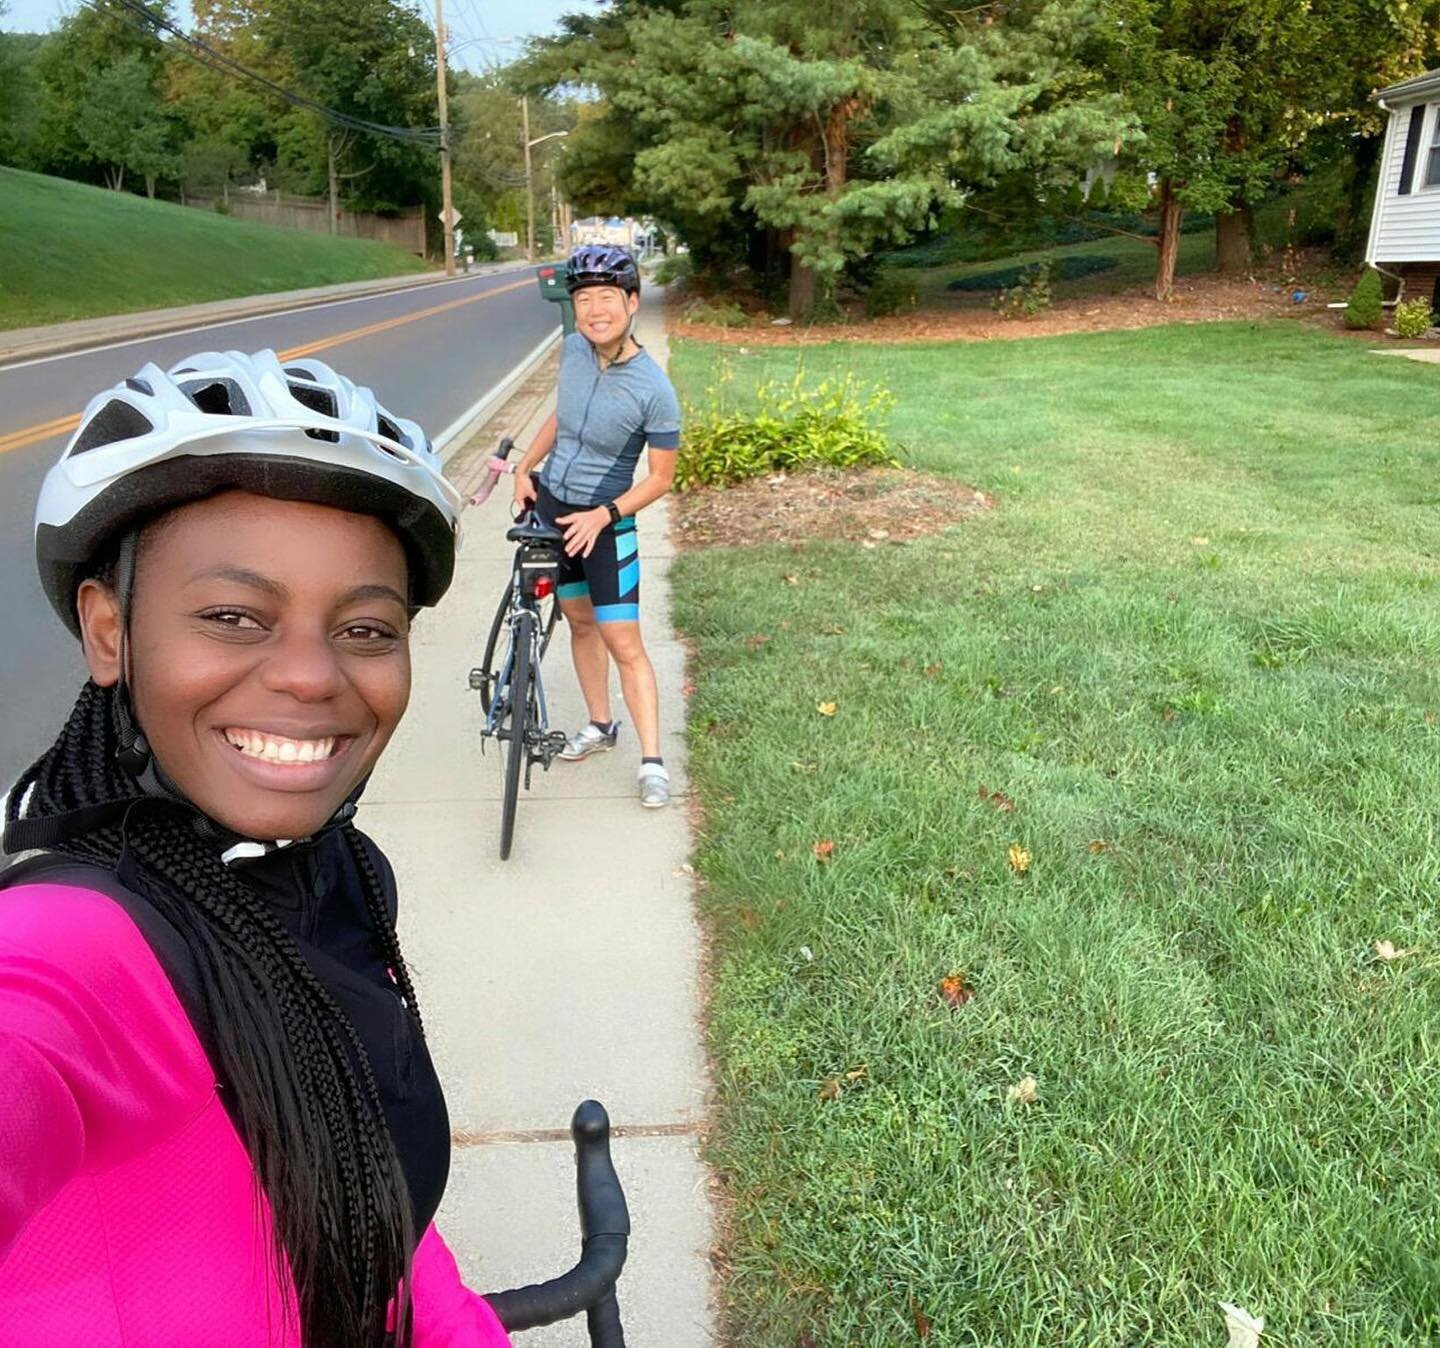 We&rsquo;re up to week 3 of our Strava challenge! Link in bio for info and to sign up. Congrats to week 2 winners - Dana, Richard, Ekaterina, and Andrew!! Valerie and Ketty featured above cycling in style.